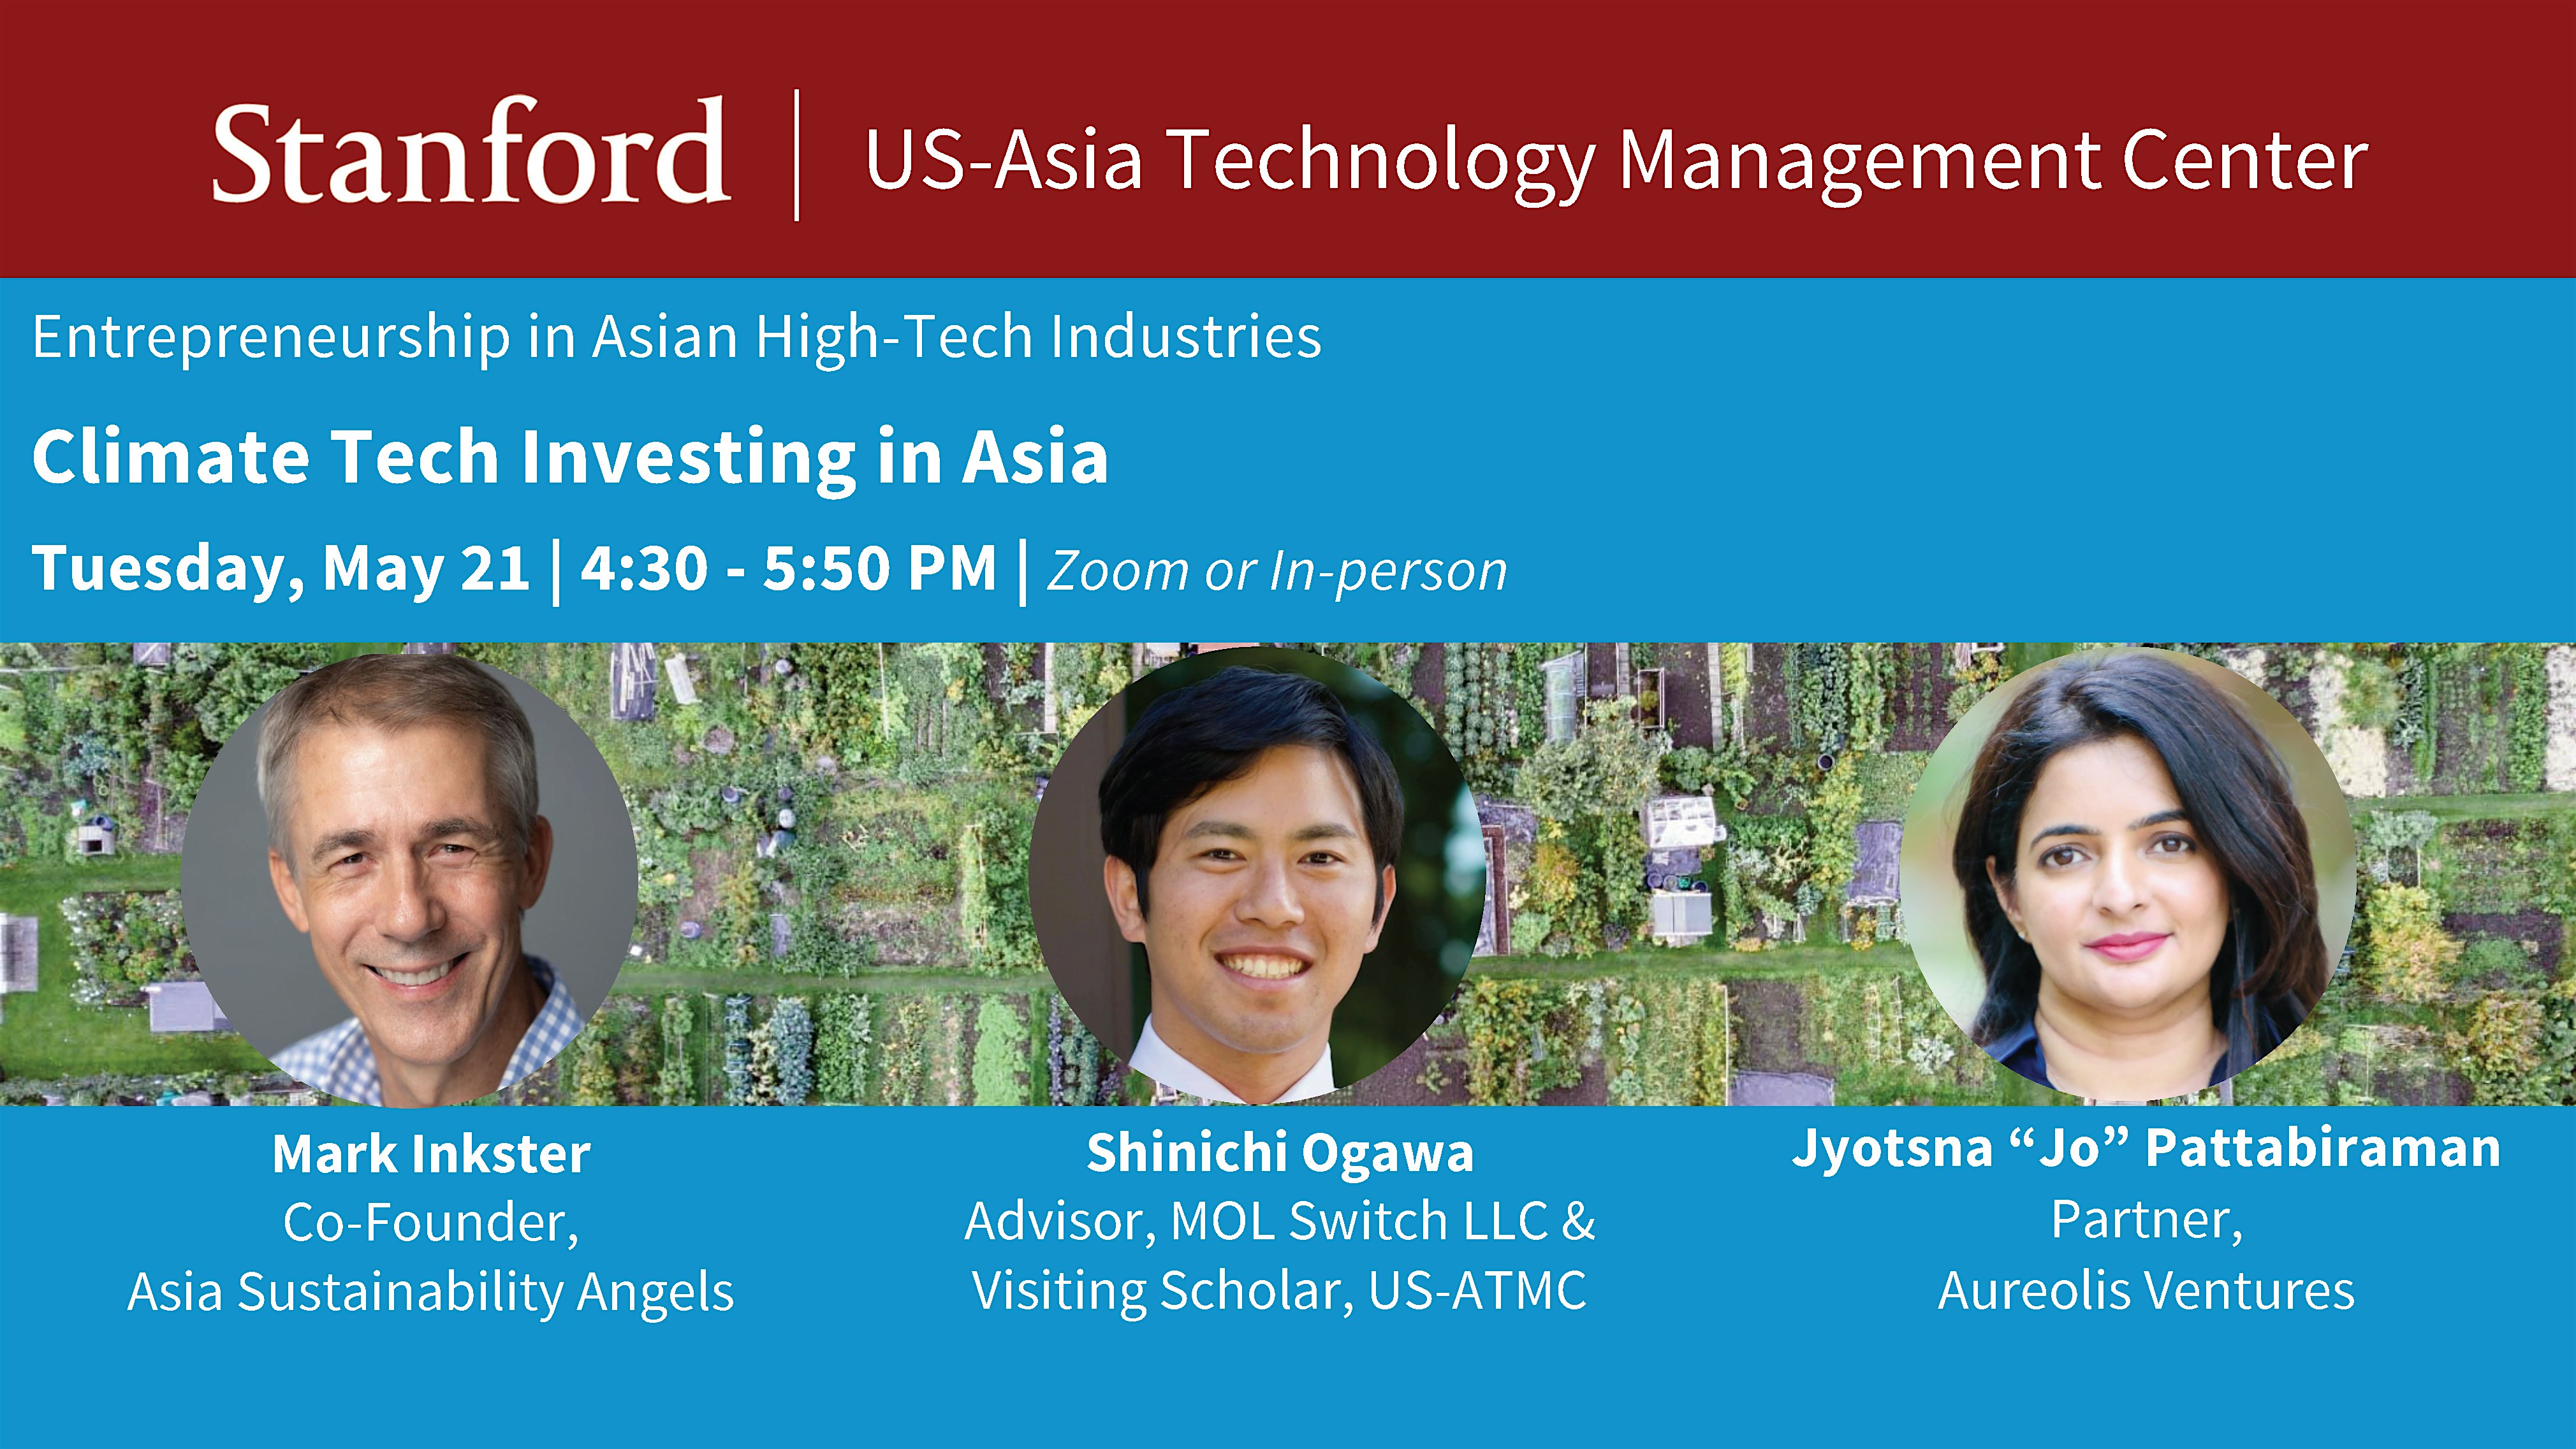 Climate Tech Investing in Asia